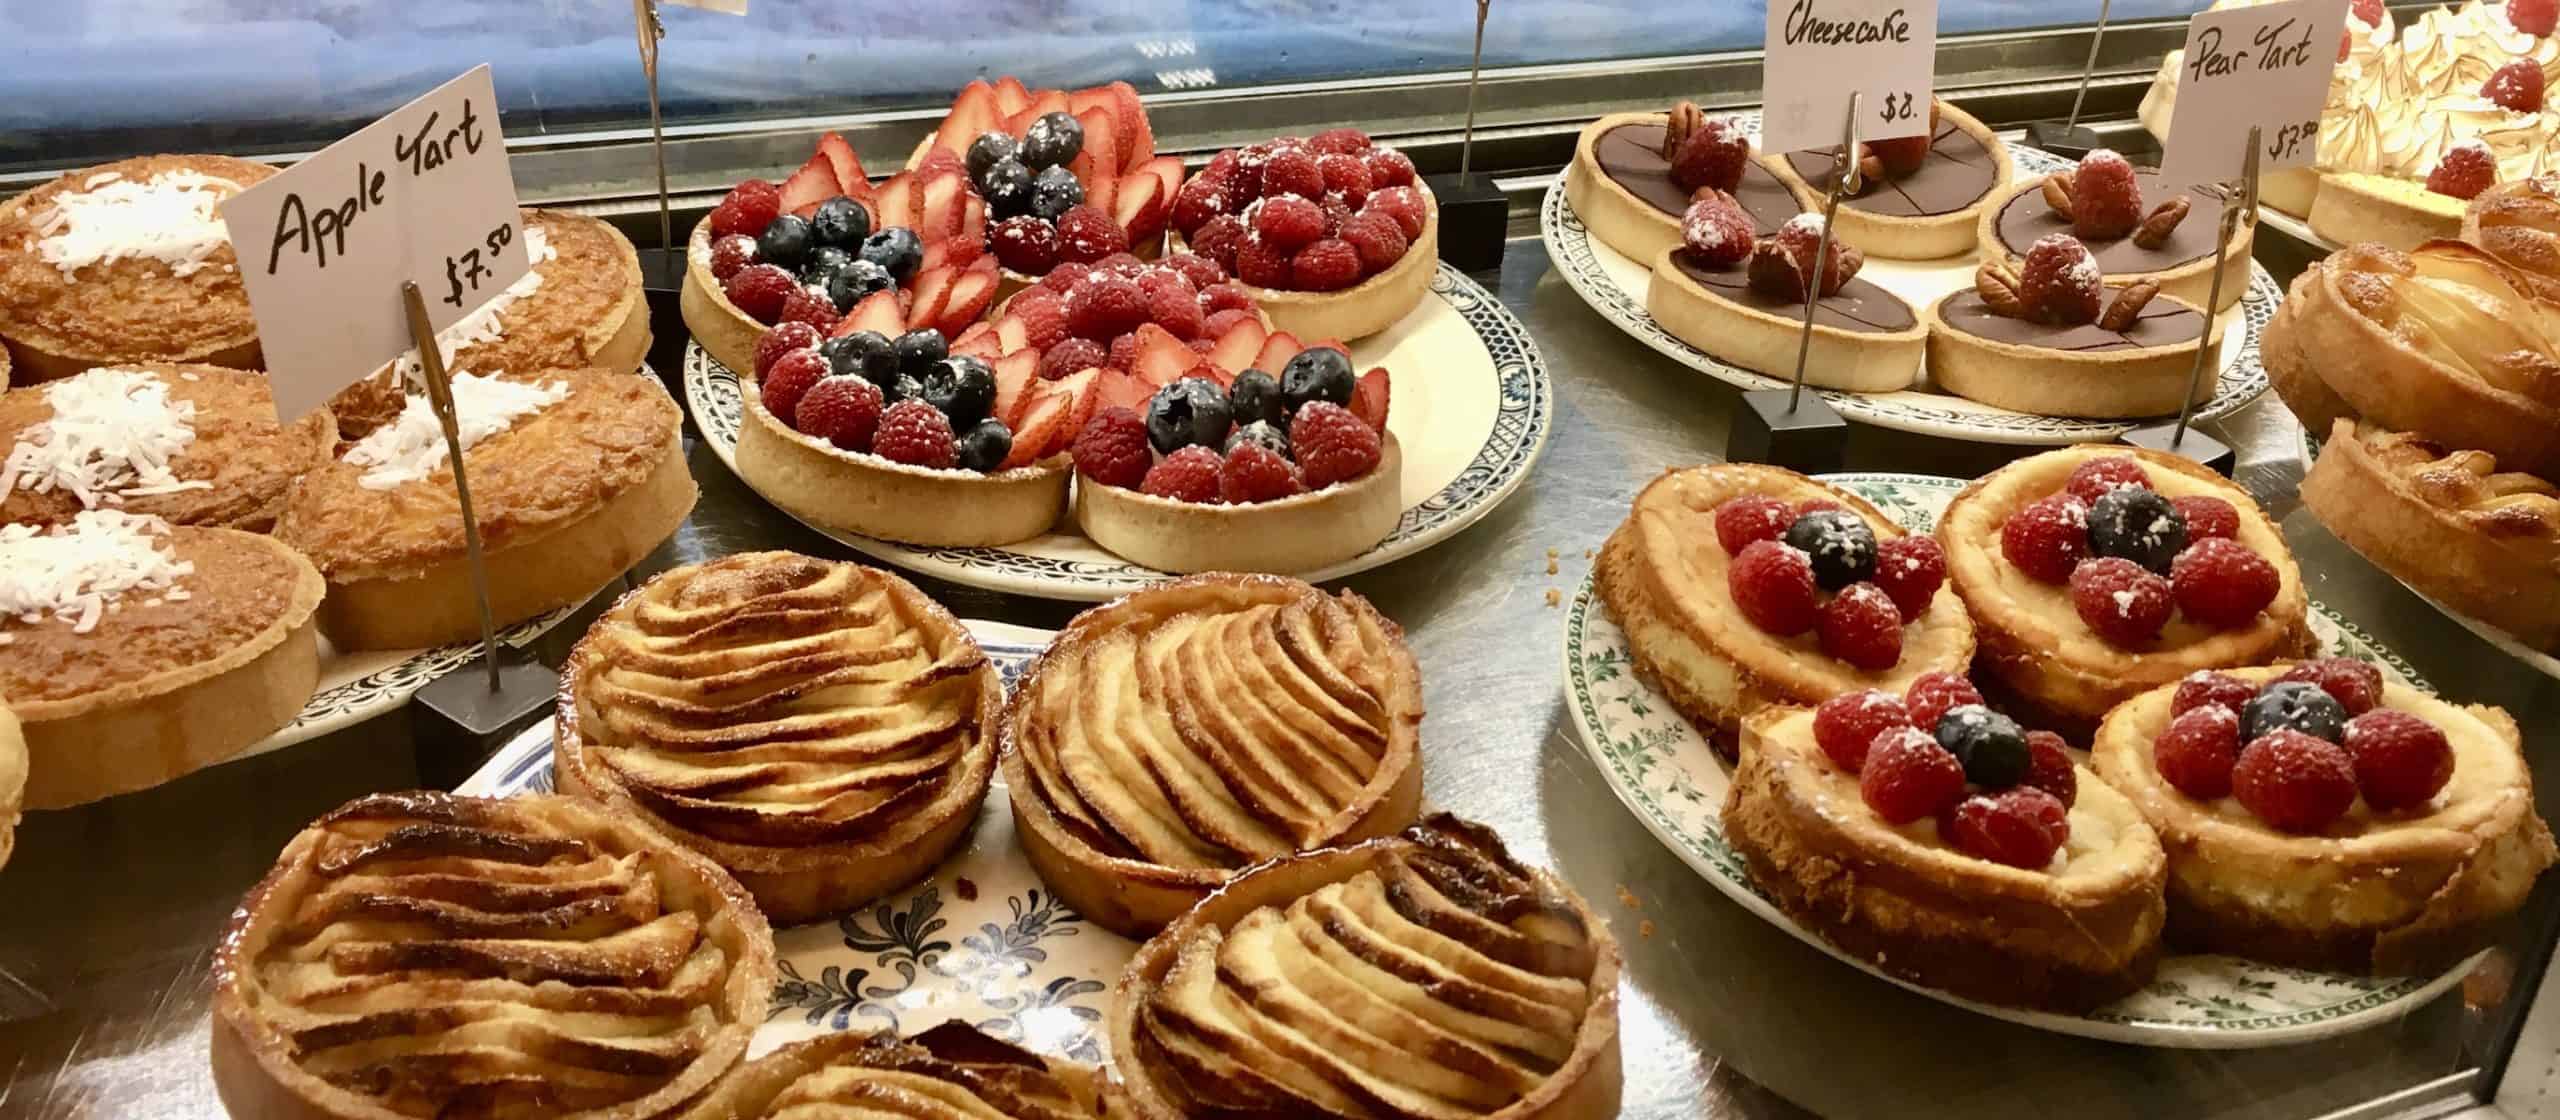 Gluten-free Parisian-style pastries and tarts in a display case, signs say "apple tart $7.50", "cheesecake $8", and "pear tart $7.50"